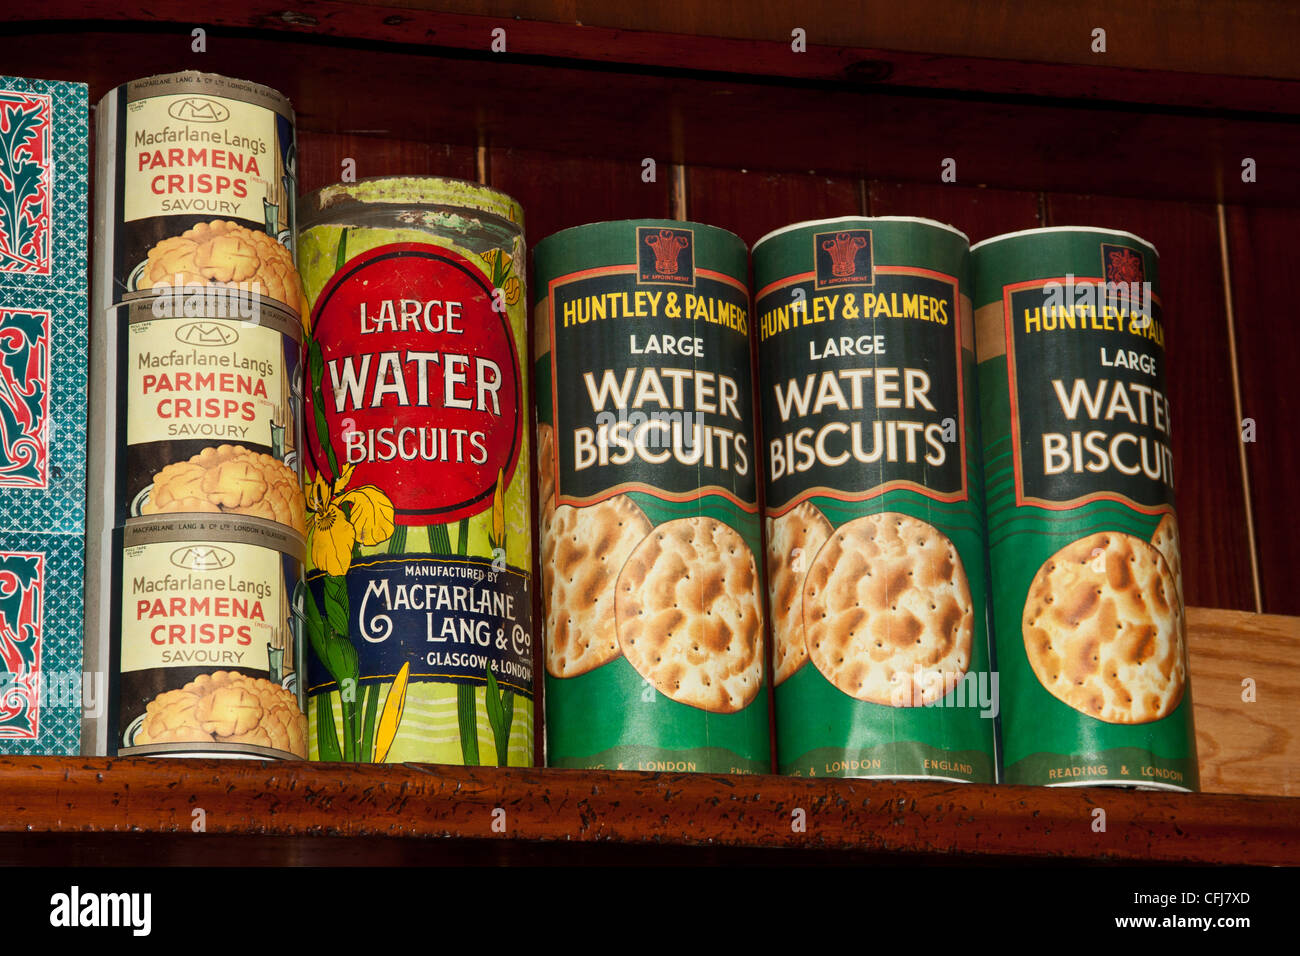 Tinned food and produce from a bygone era, old fashioned style general grocers and supply store from early 1930's. Stock Photo